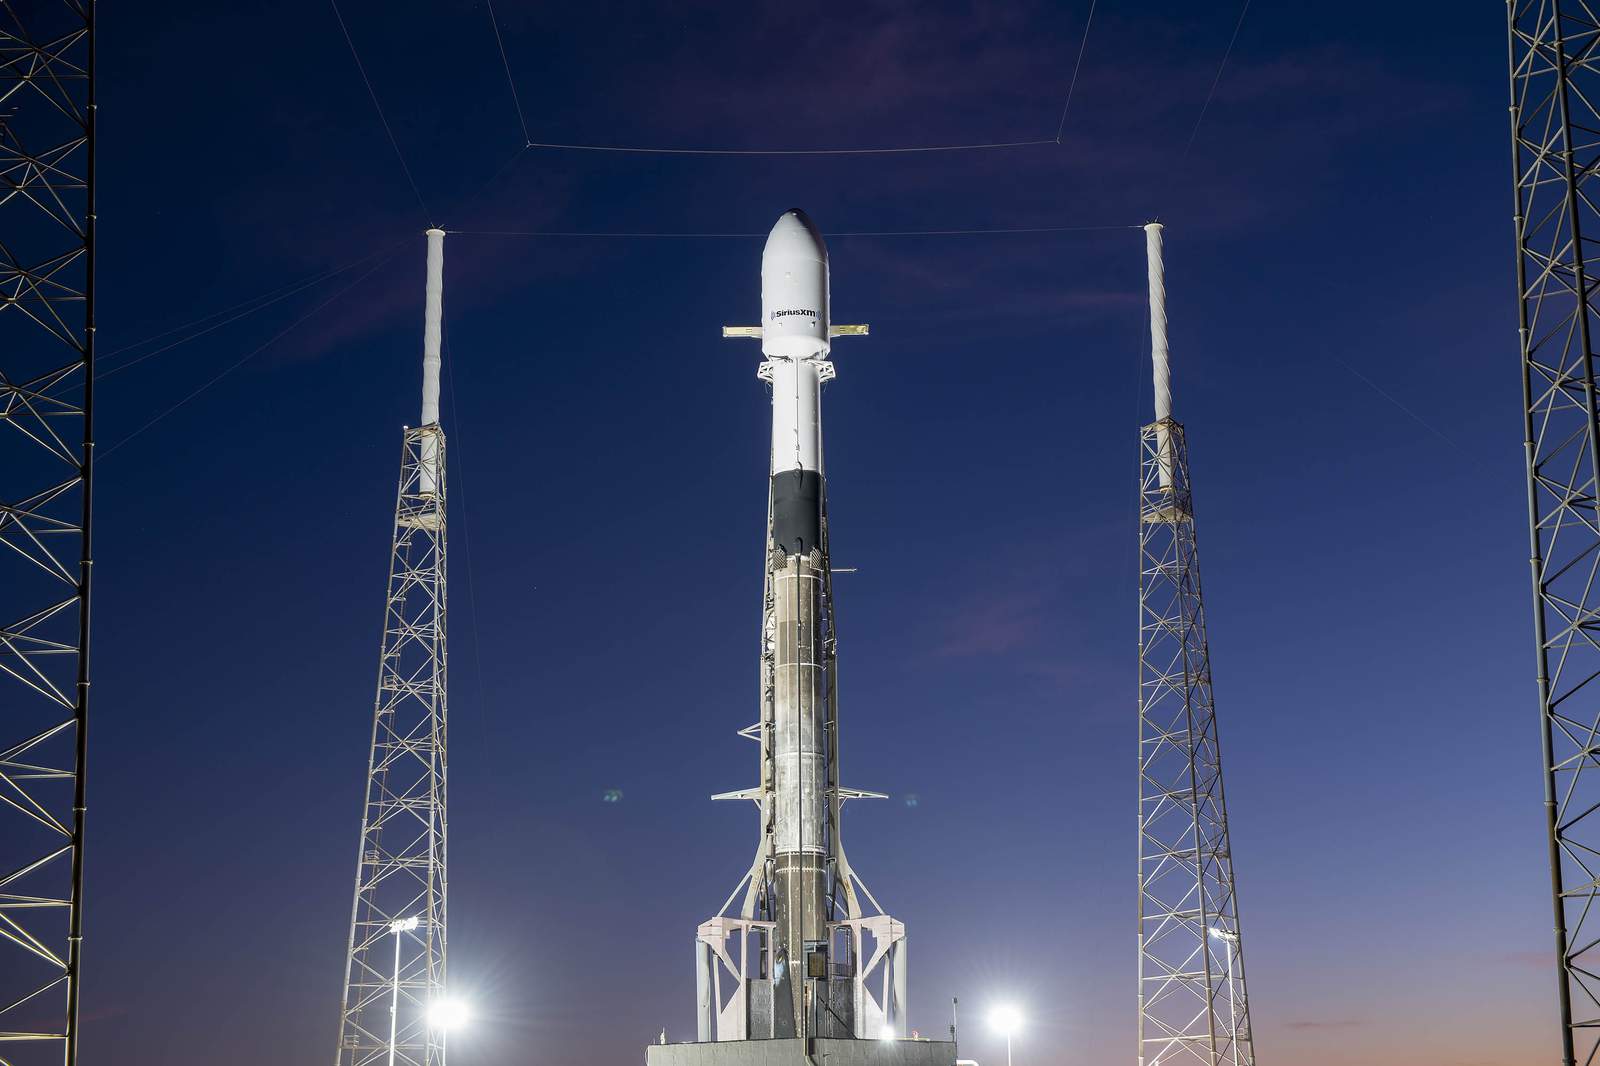 SpaceX's final launch of 2020 to bring a sonic boom to Central Florida

